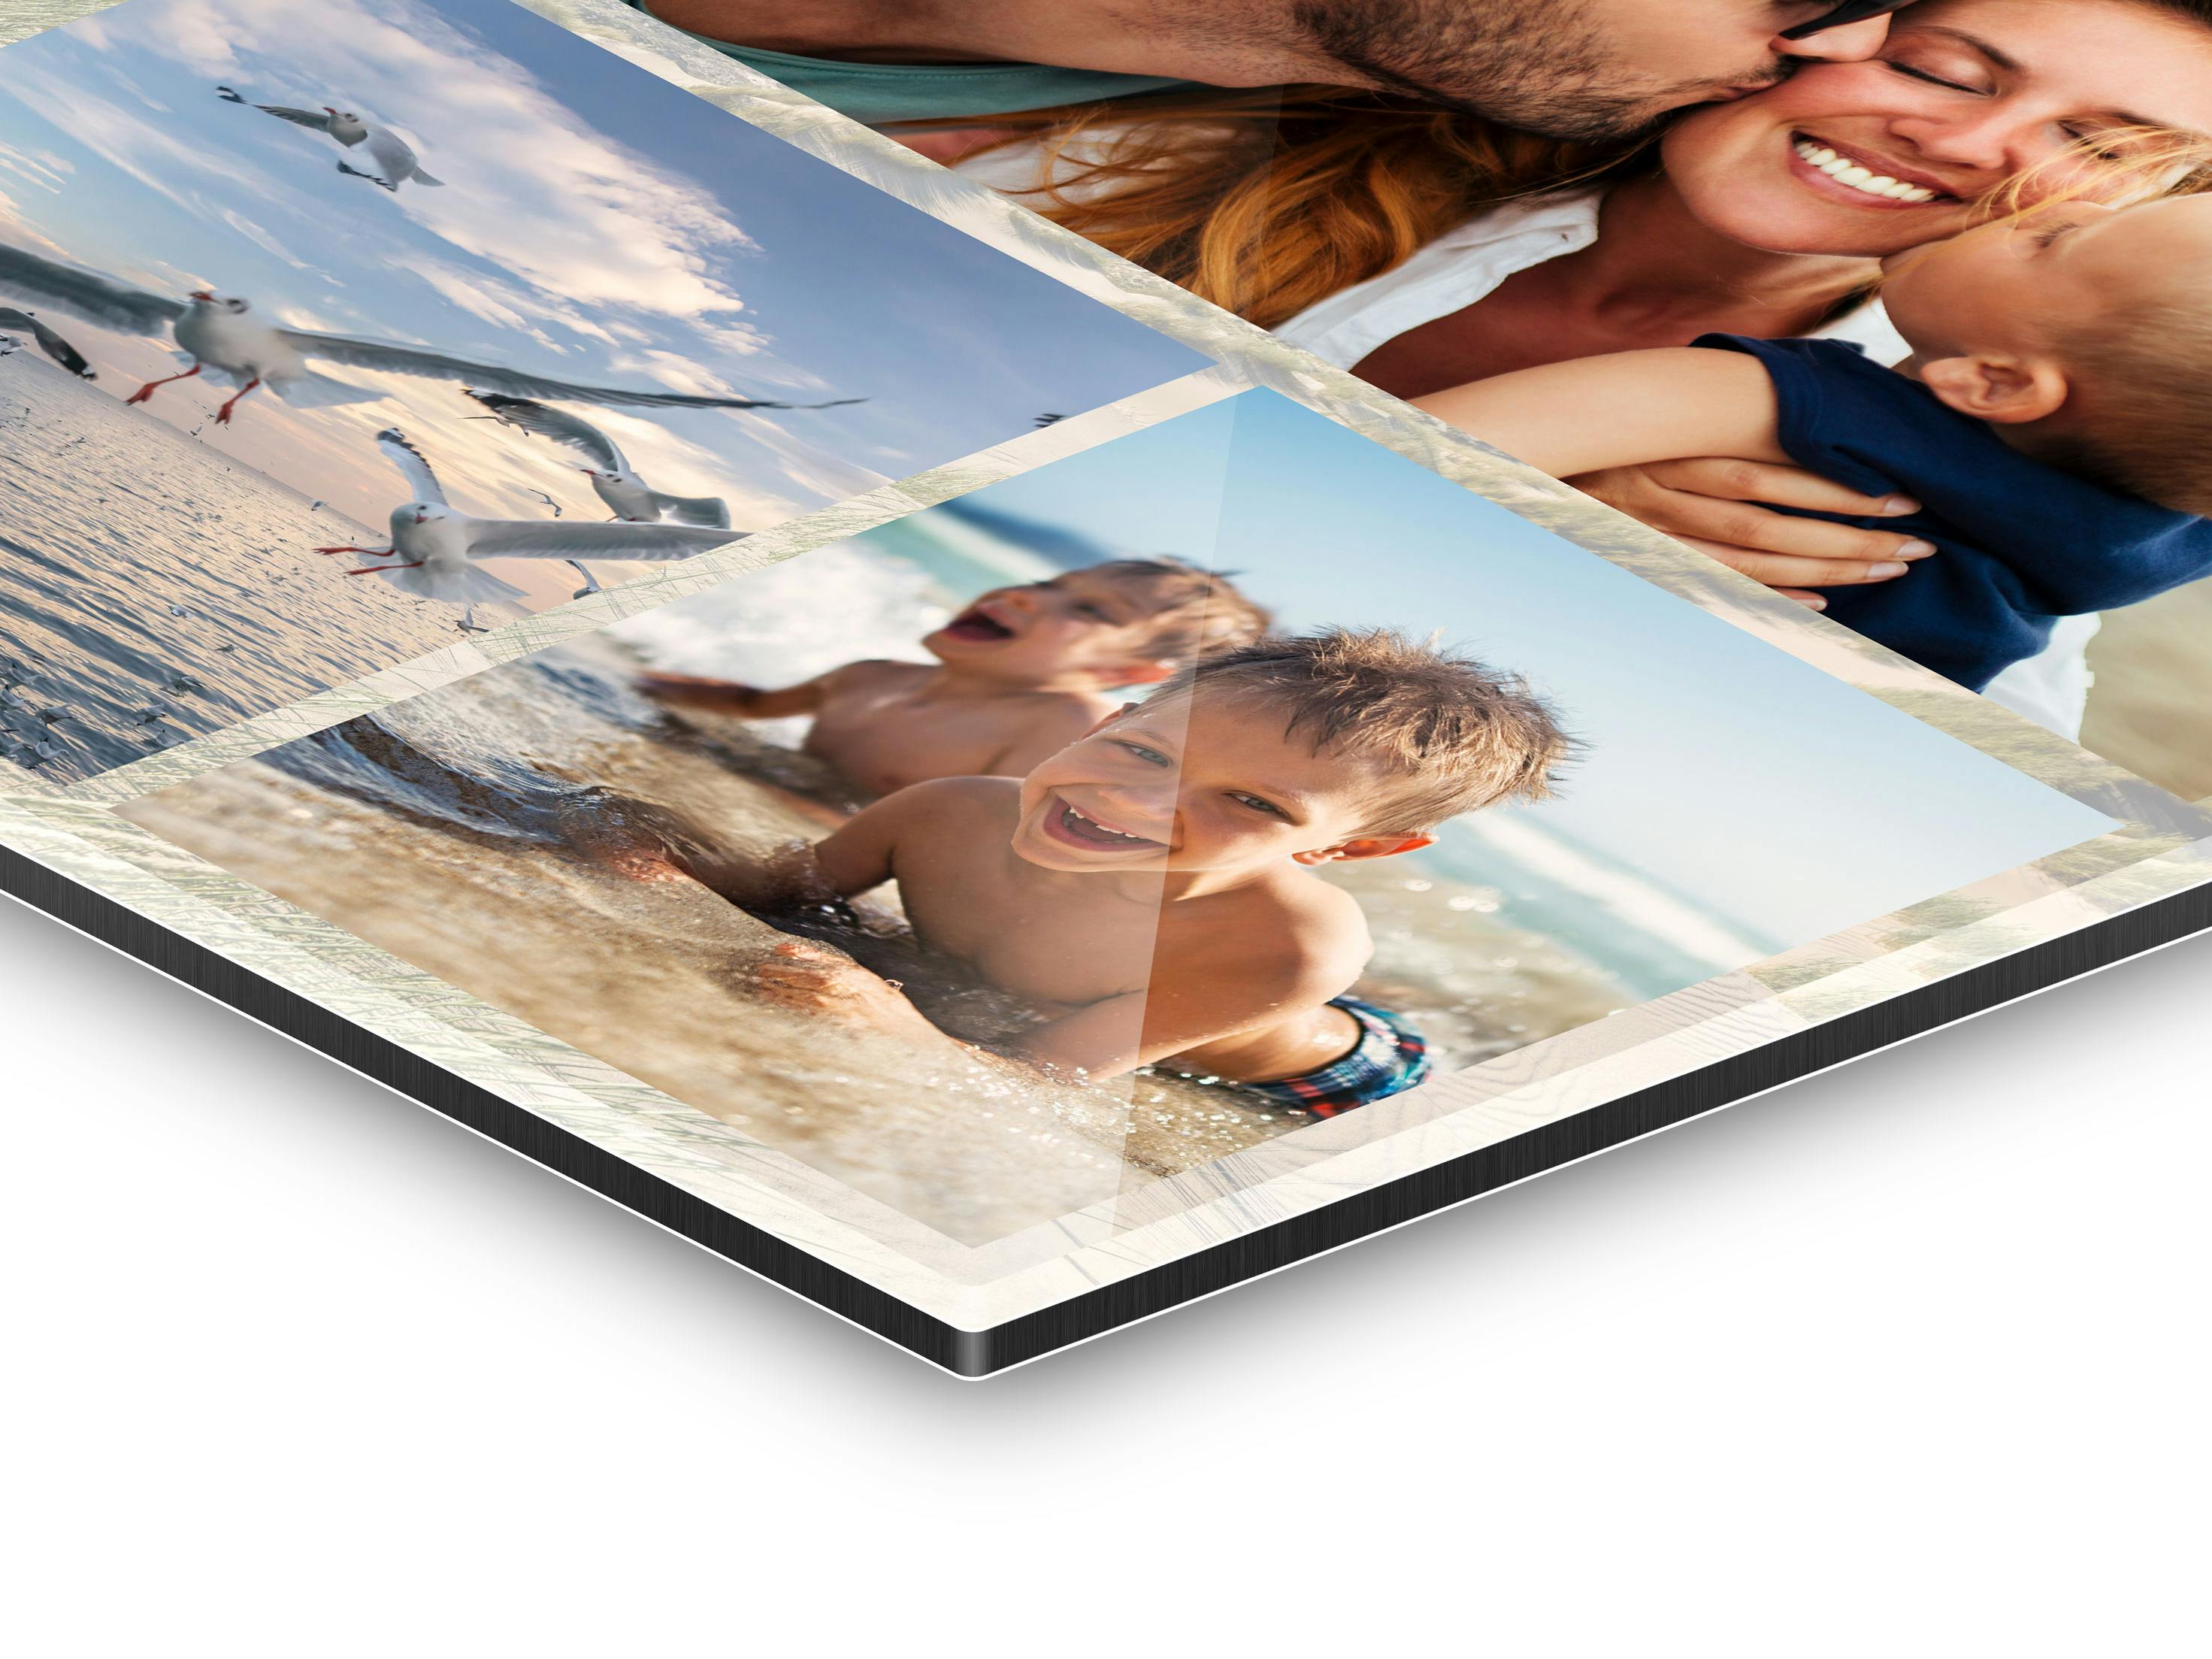 Photo collage as a gallery print with summer images